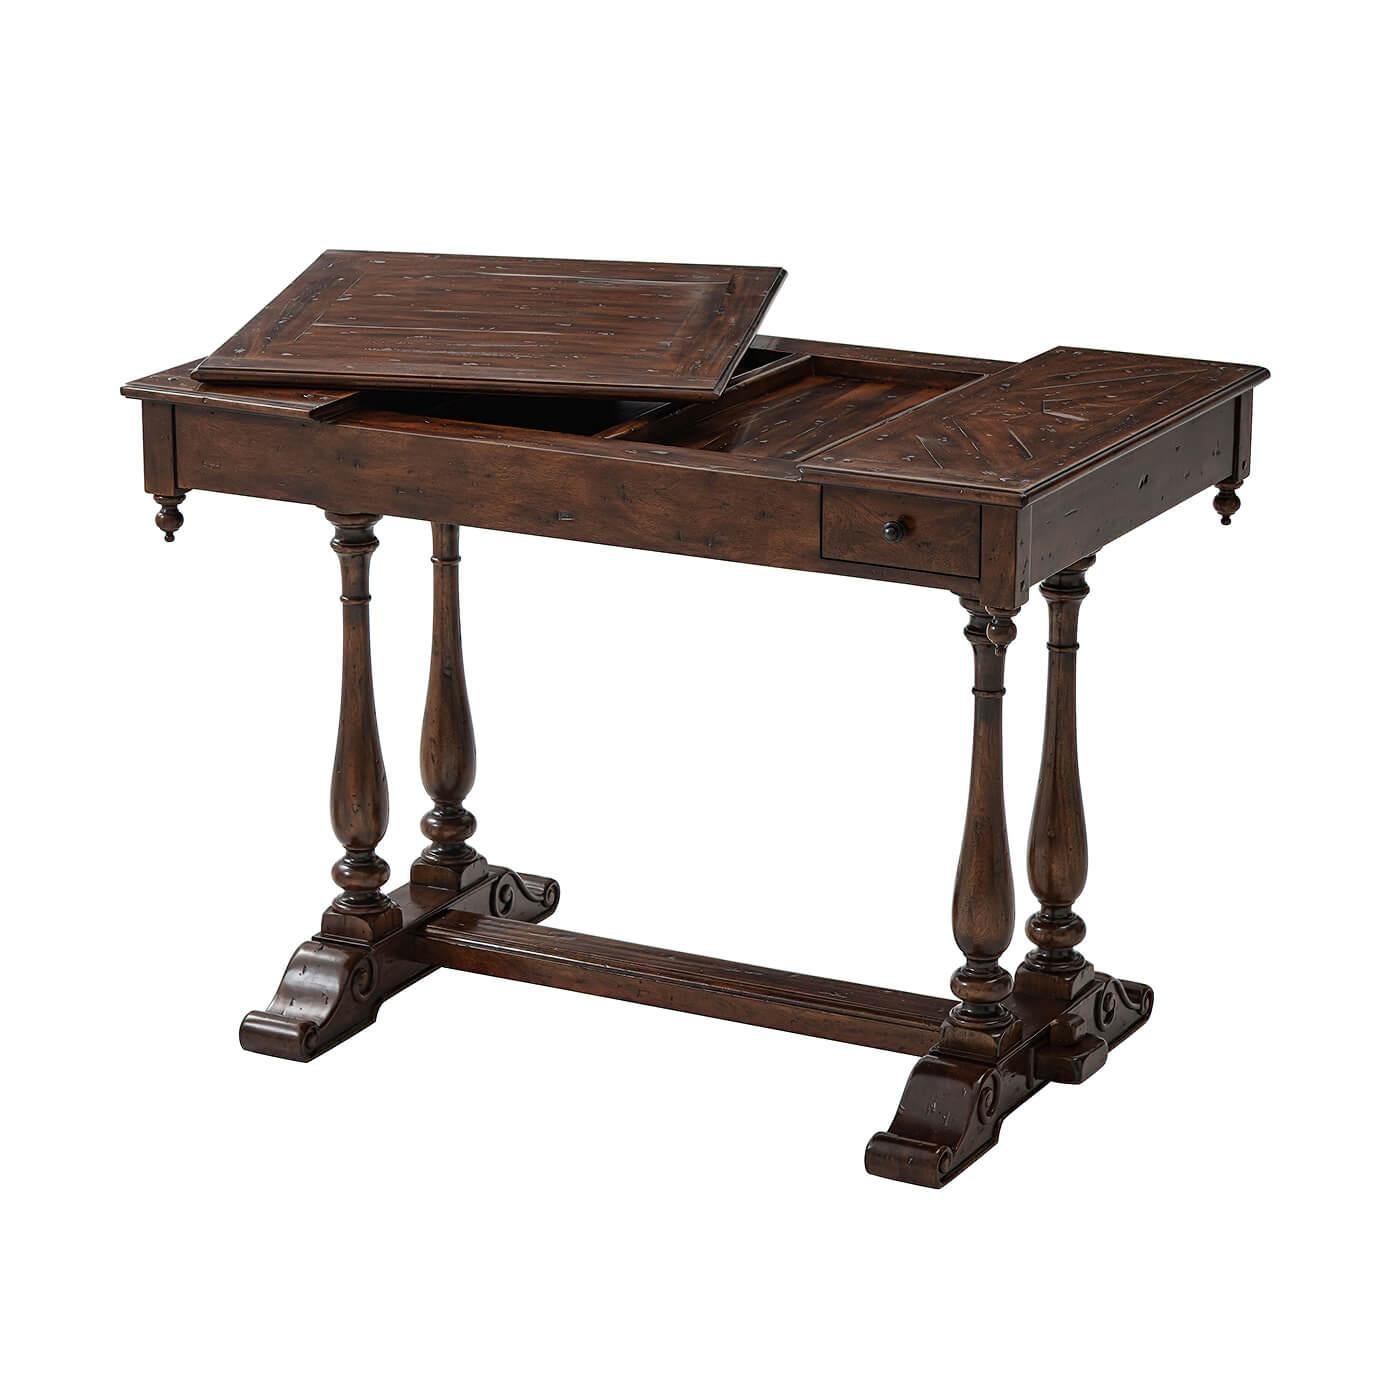 Rustic English Country Games Table For Sale